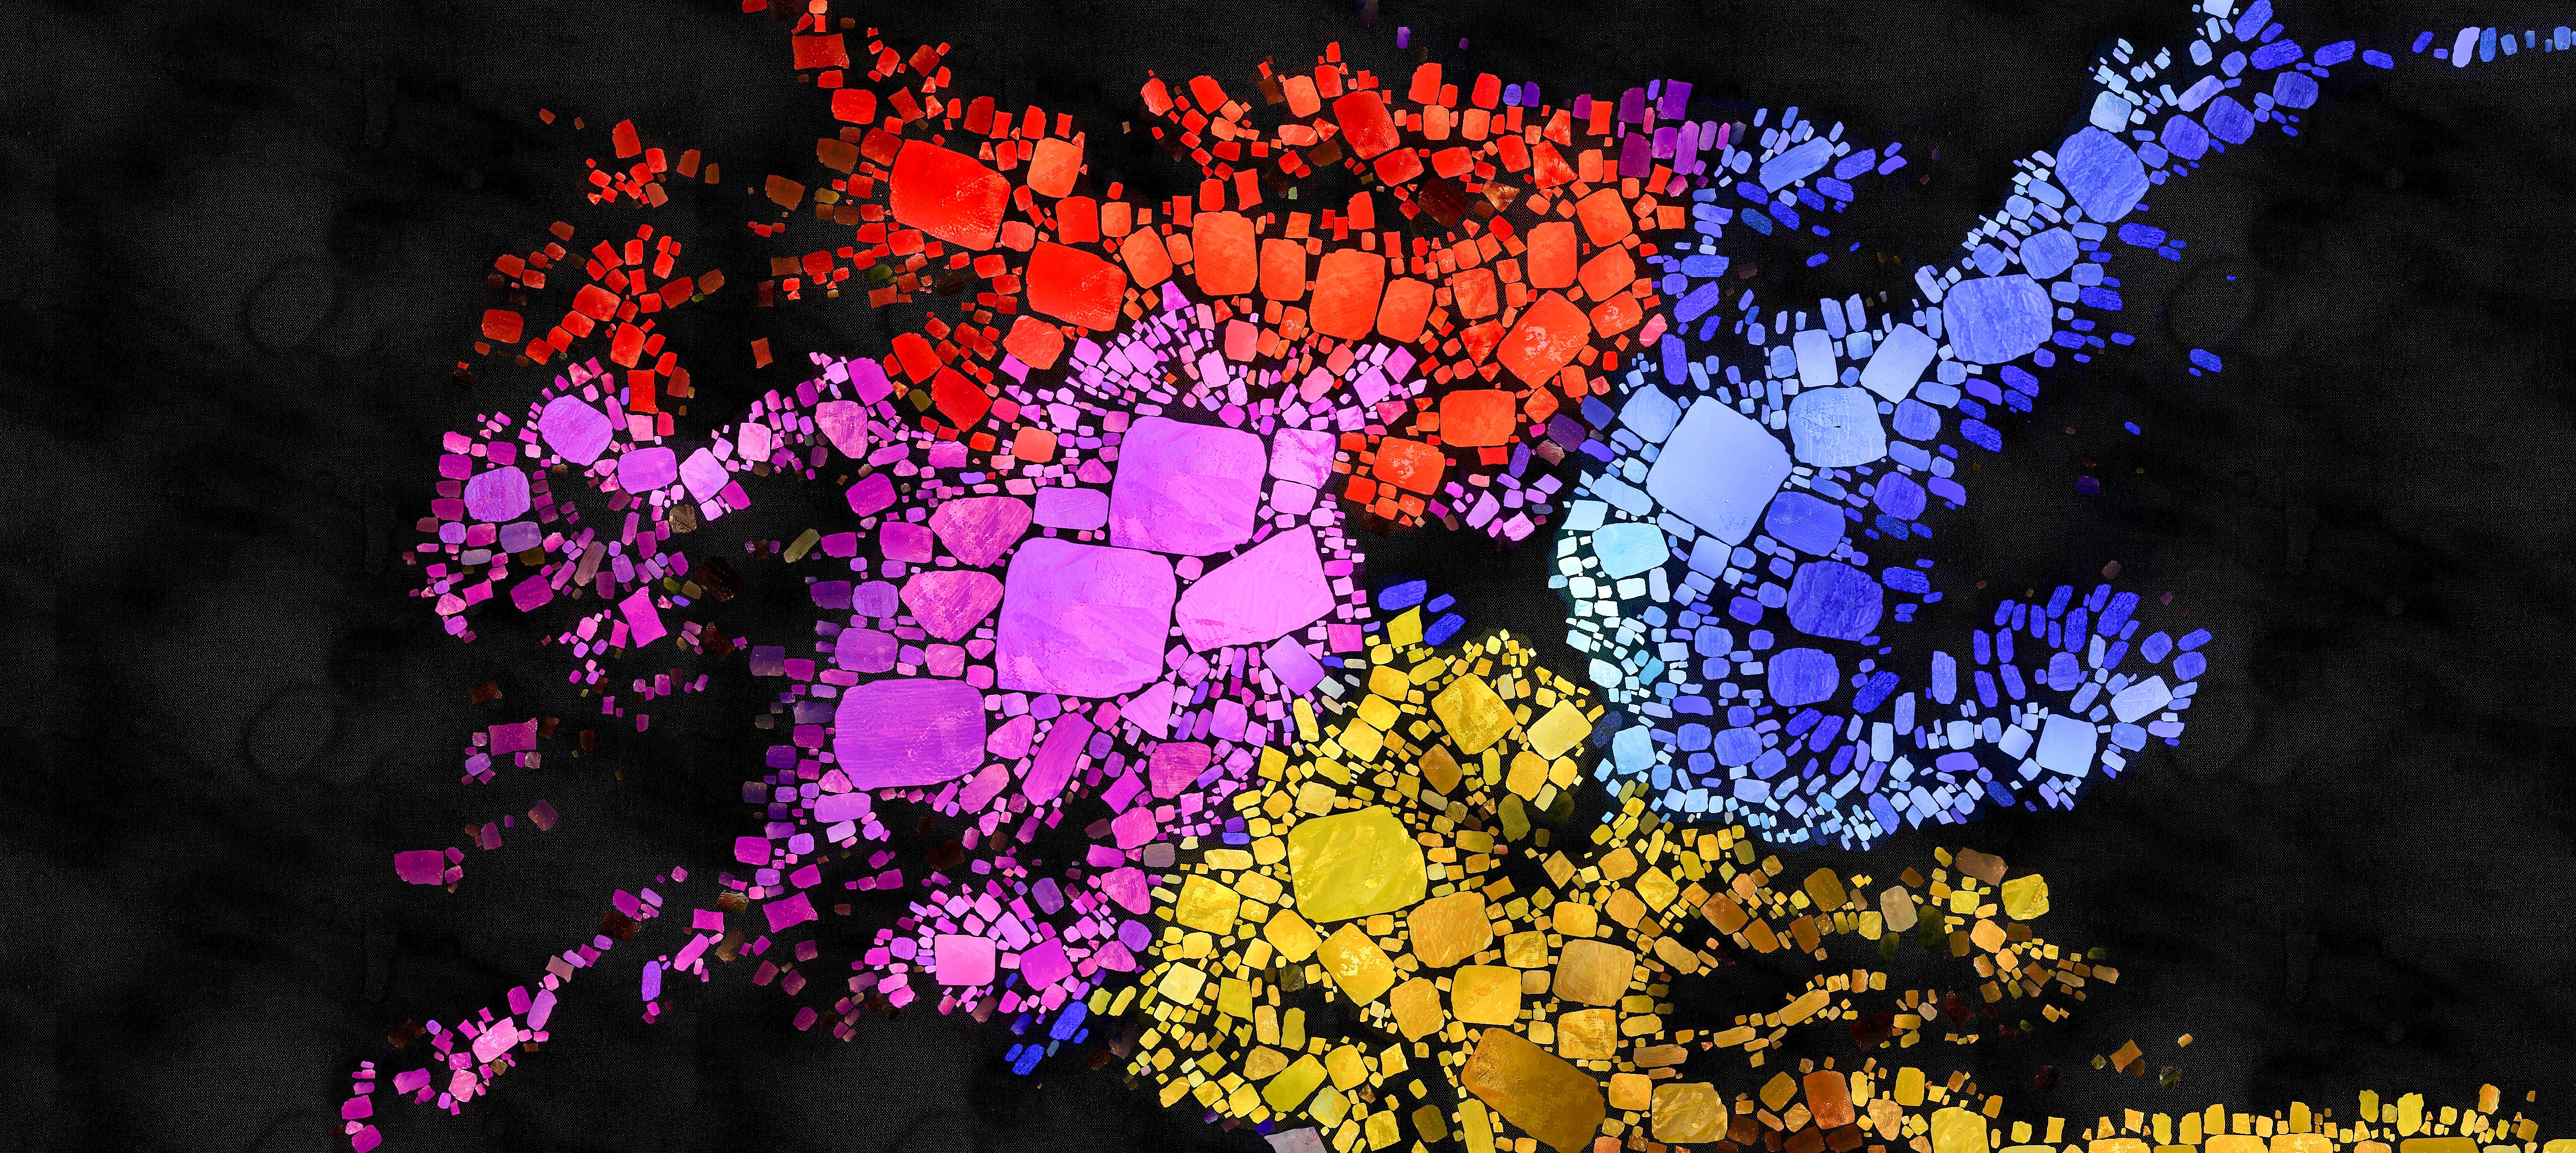 Digital Paint Splash Mosaic Abstract Dark Wide Image Wide Screen Illustration Colorful Detailed 5600x2506